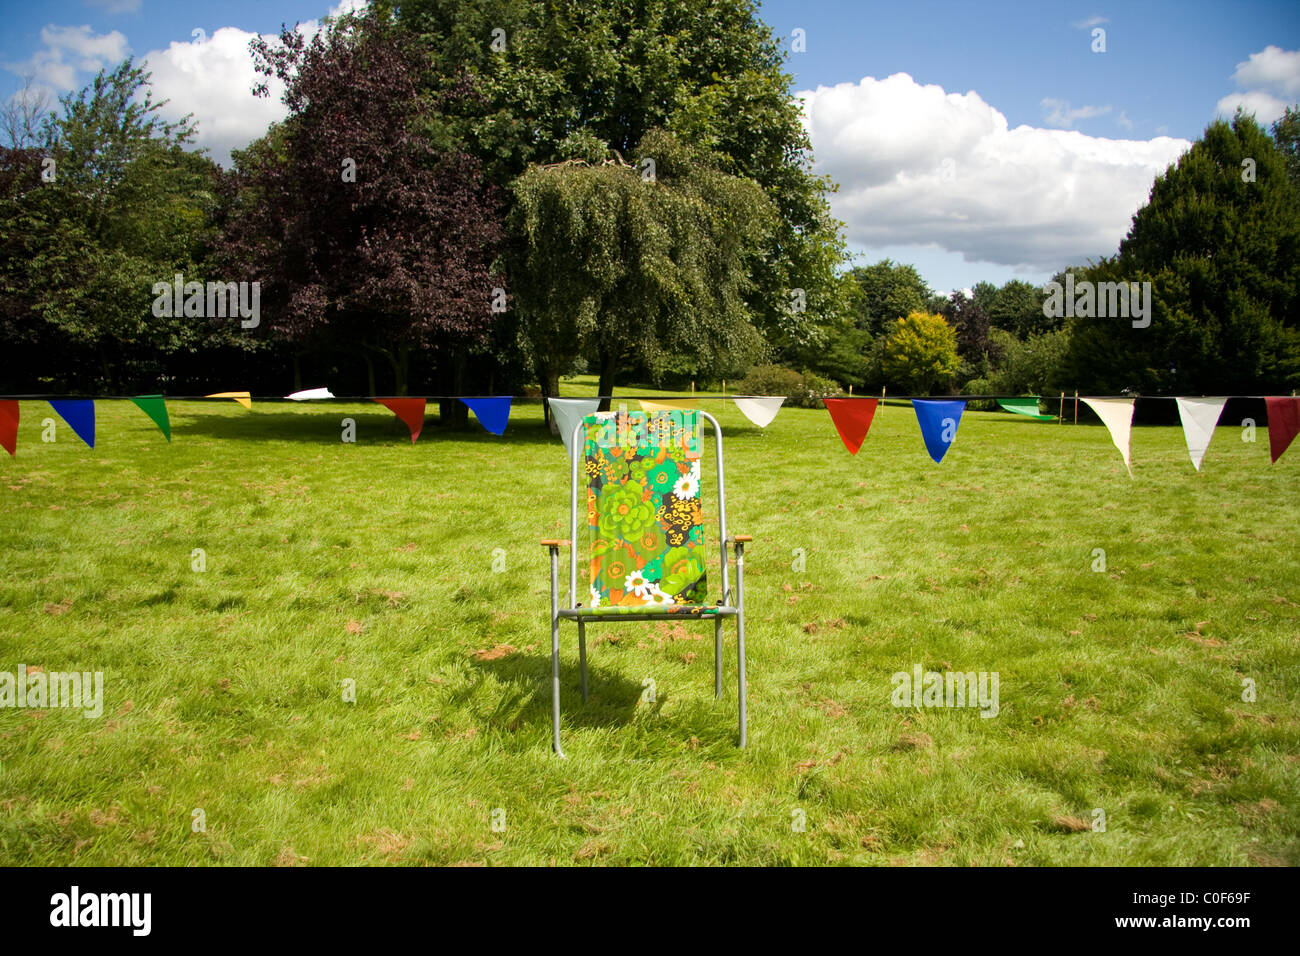 Colorful chair on a green grass with red, blue, green and white bunting Stock Photo